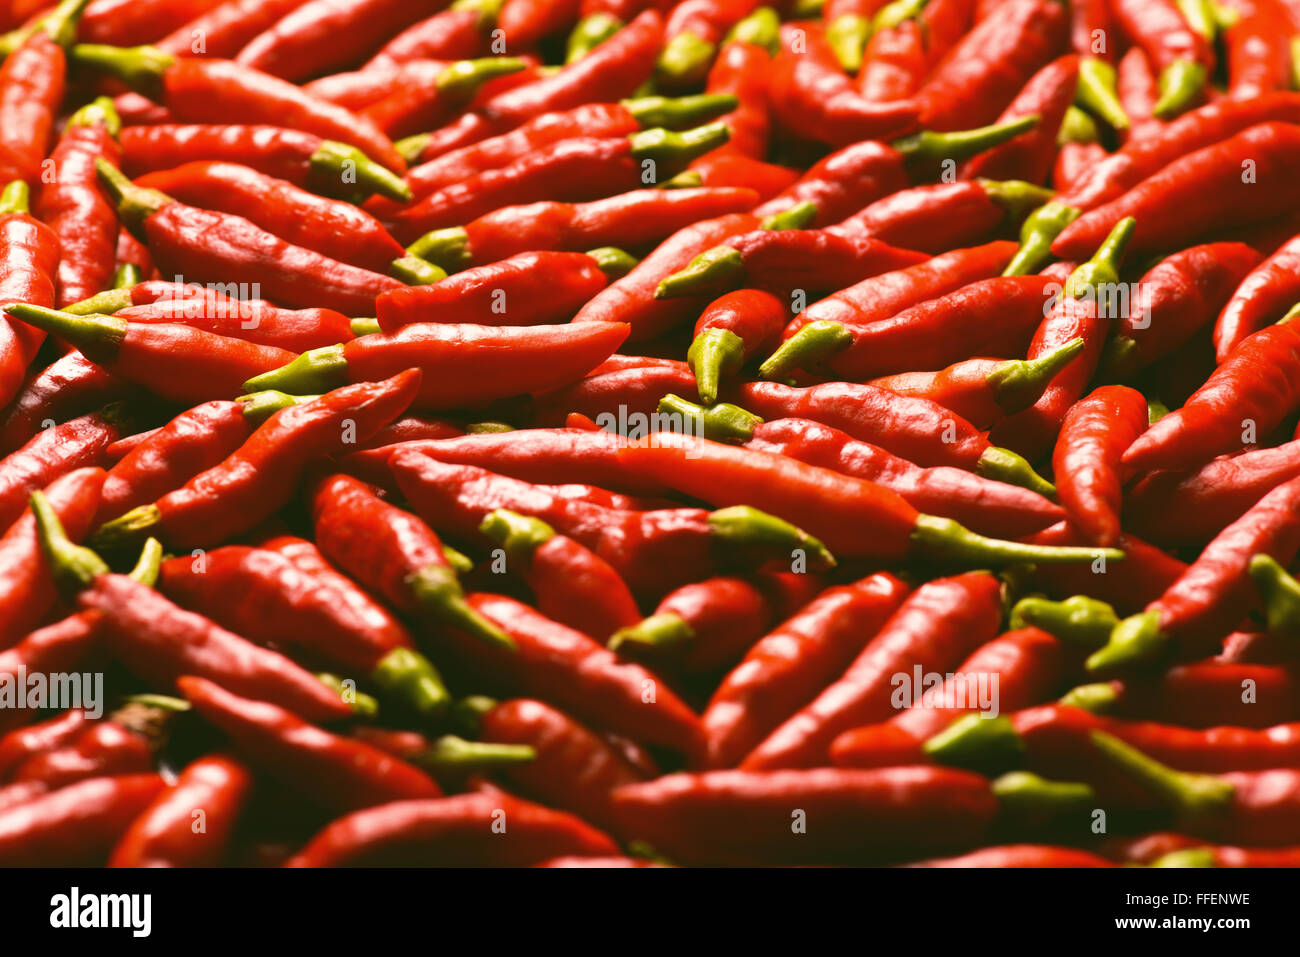 Image of red peppers with depth of field and focus on the center. Stock Photo